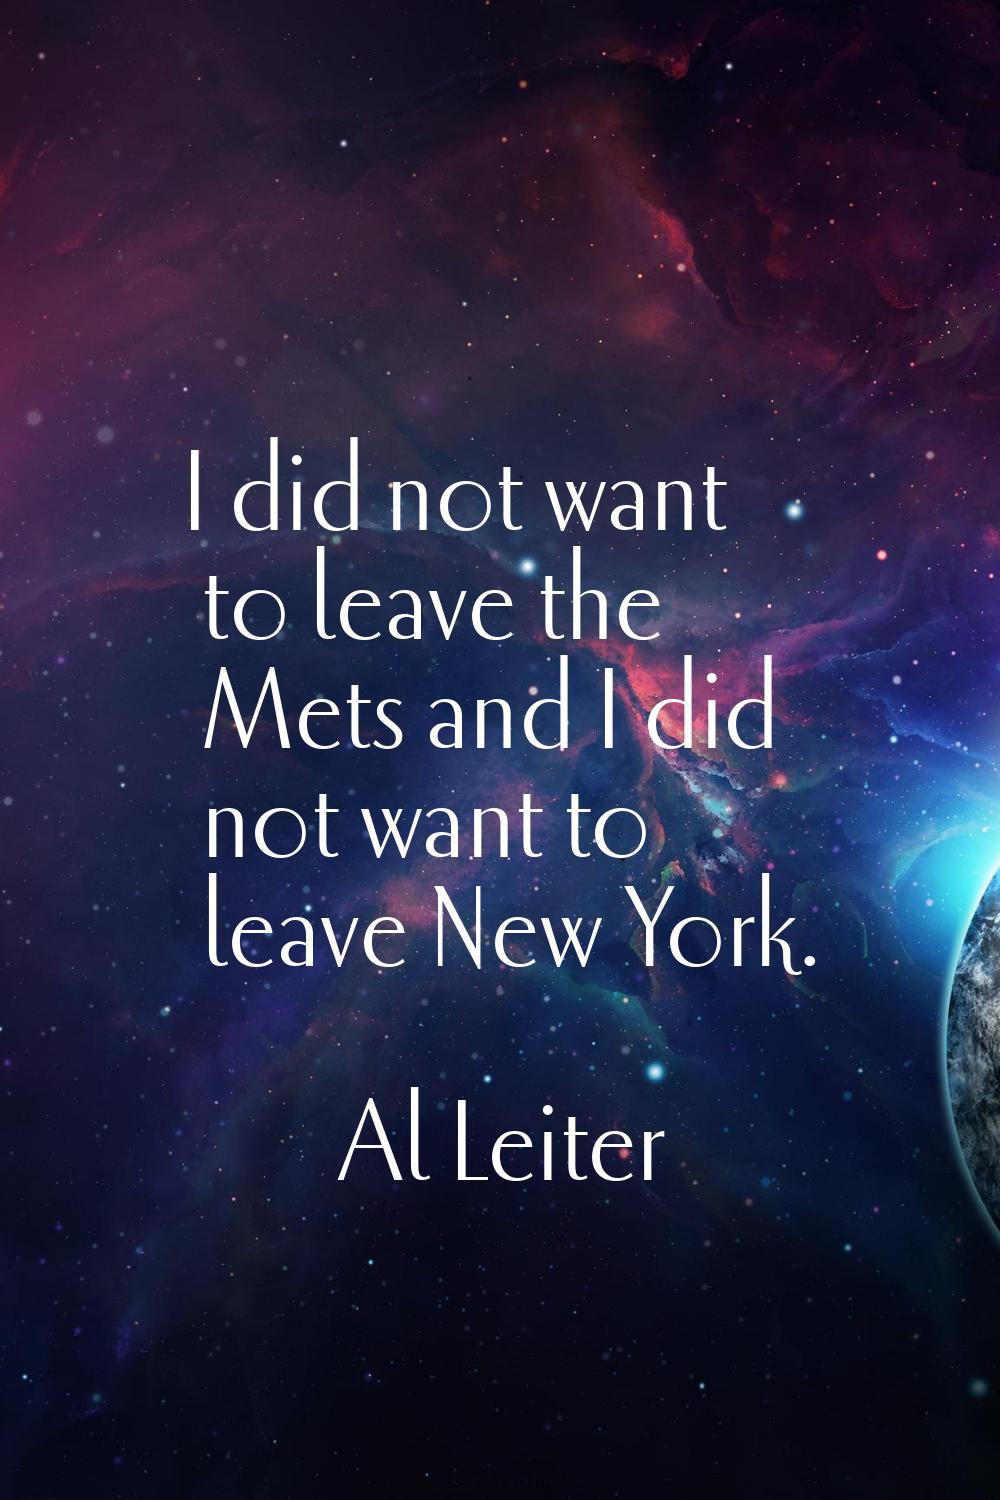 I did not want to leave the Mets and I did not want to leave New York.